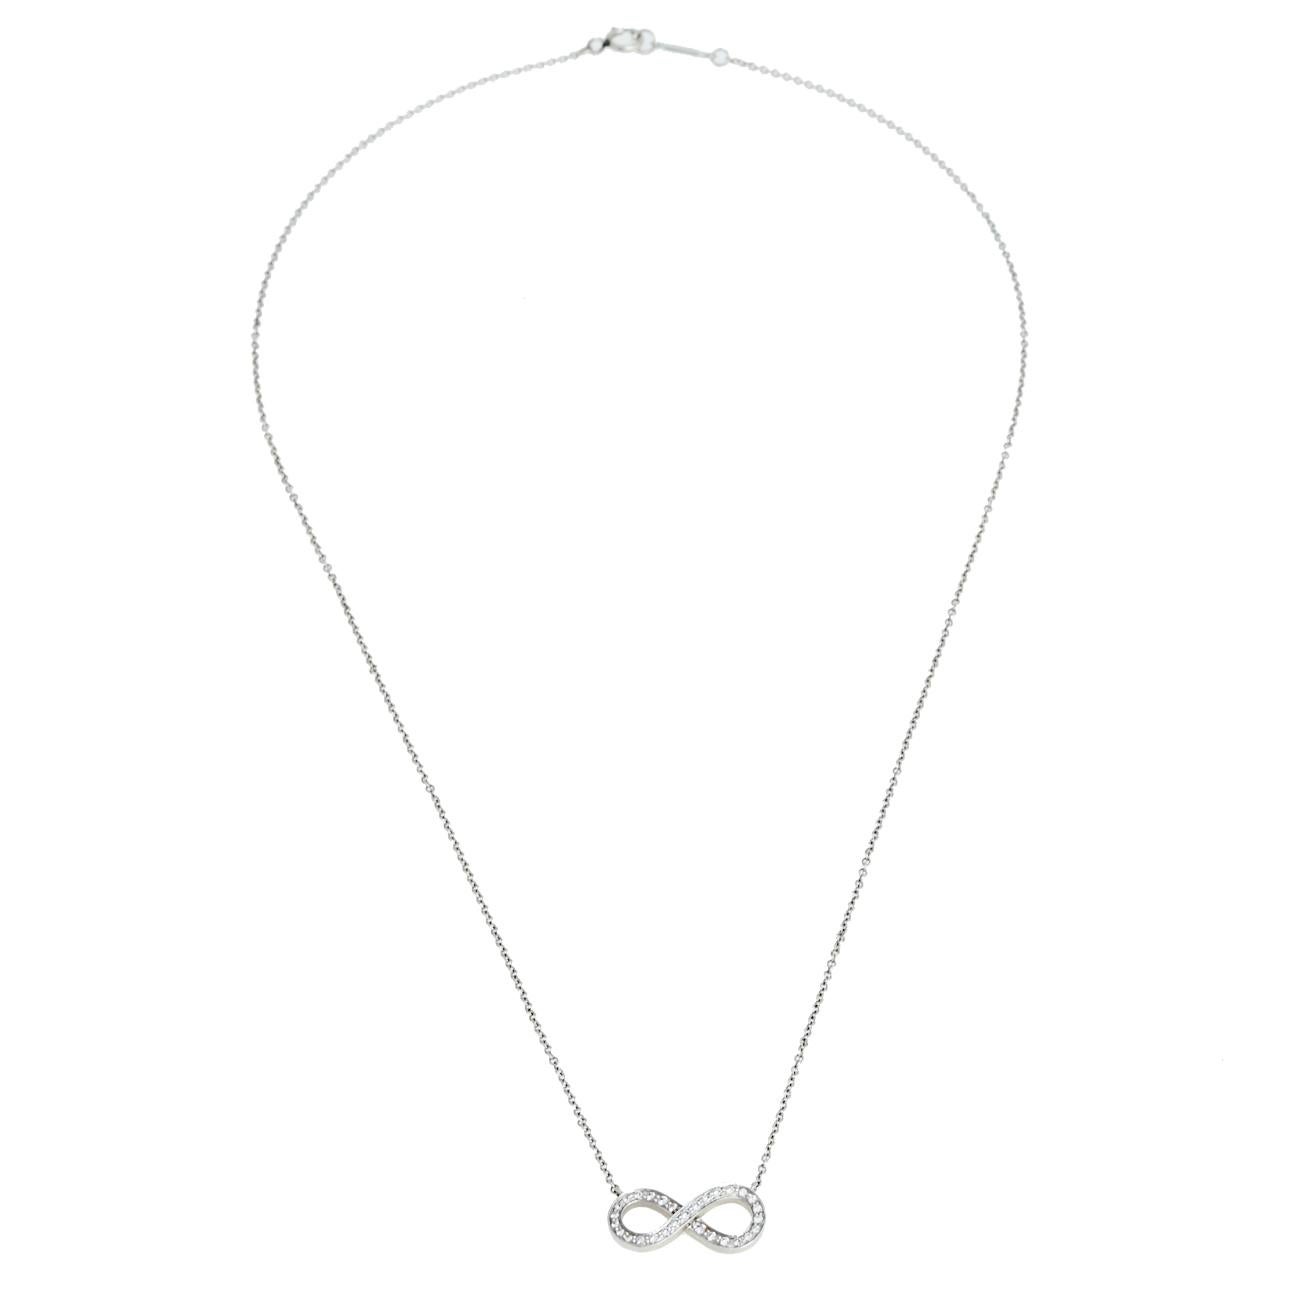 This one is for sophisticated fashionistas who love to keep it simple yet stylish. This Tiffany necklace comes with a platinum infinity motif embellished with diamonds weighing approximately 0.10 carat. It is secured with a spring-ring clasp closure